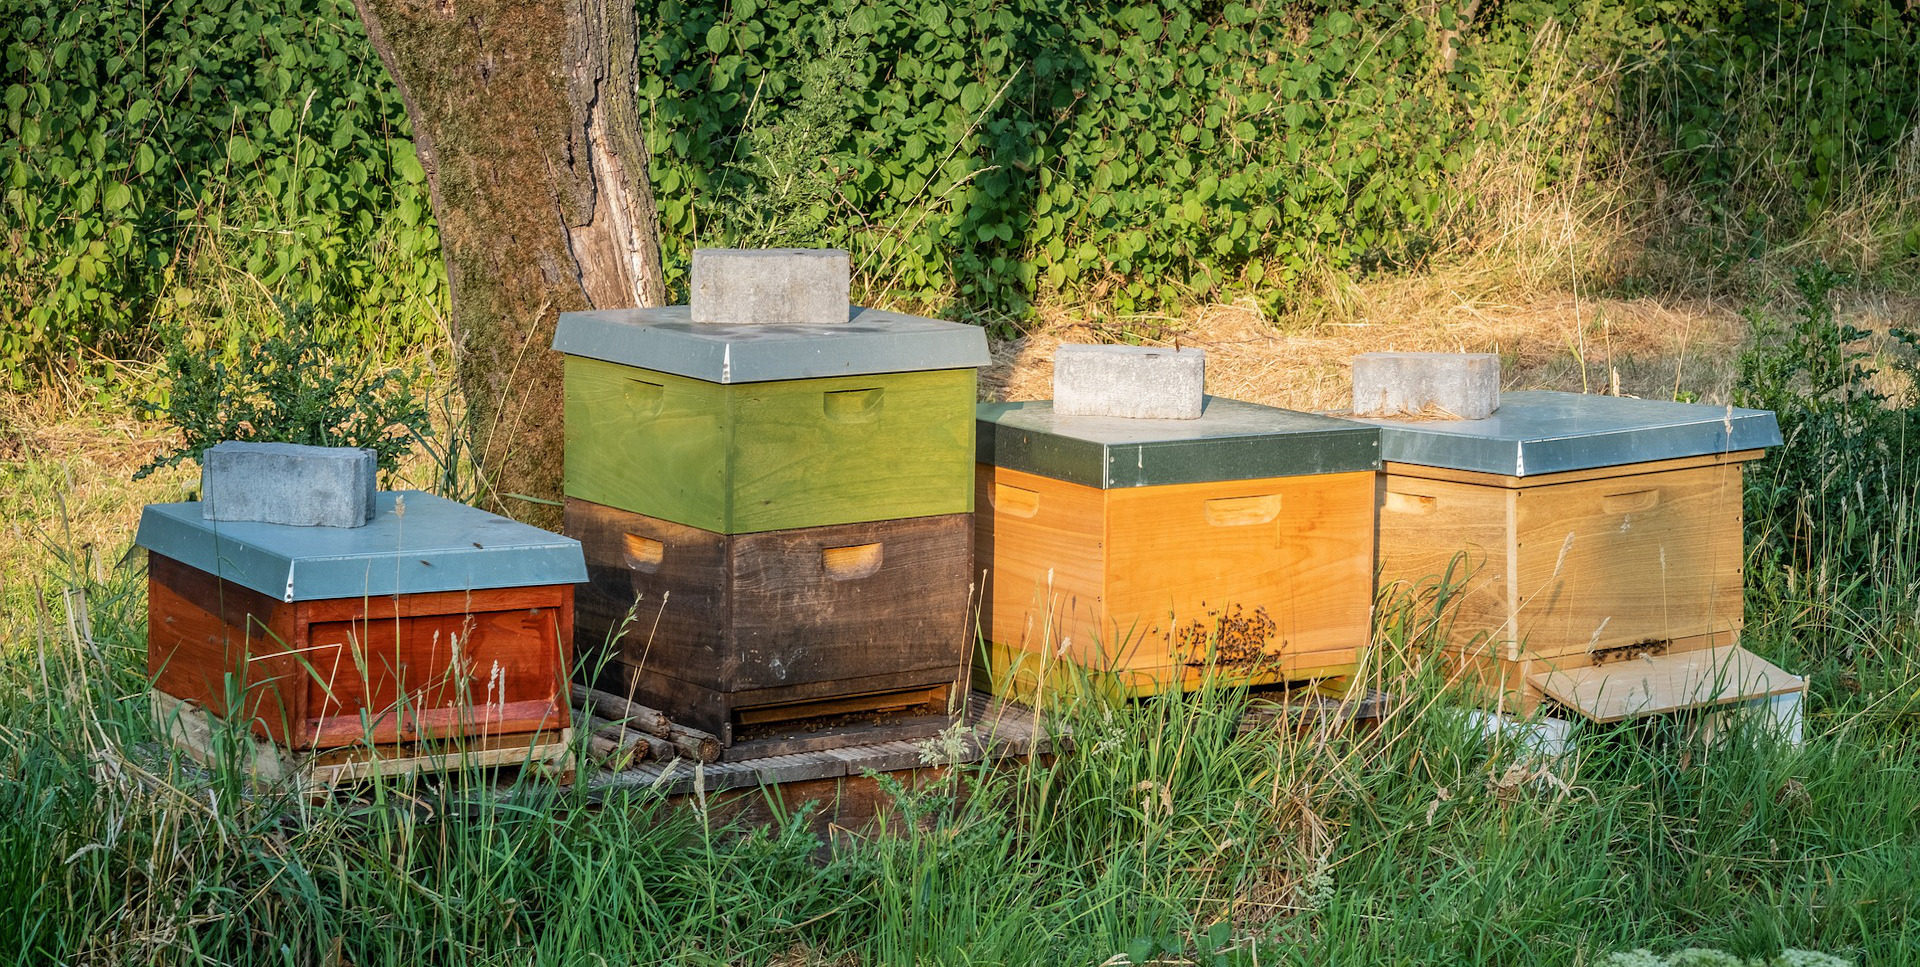 Four bee hives